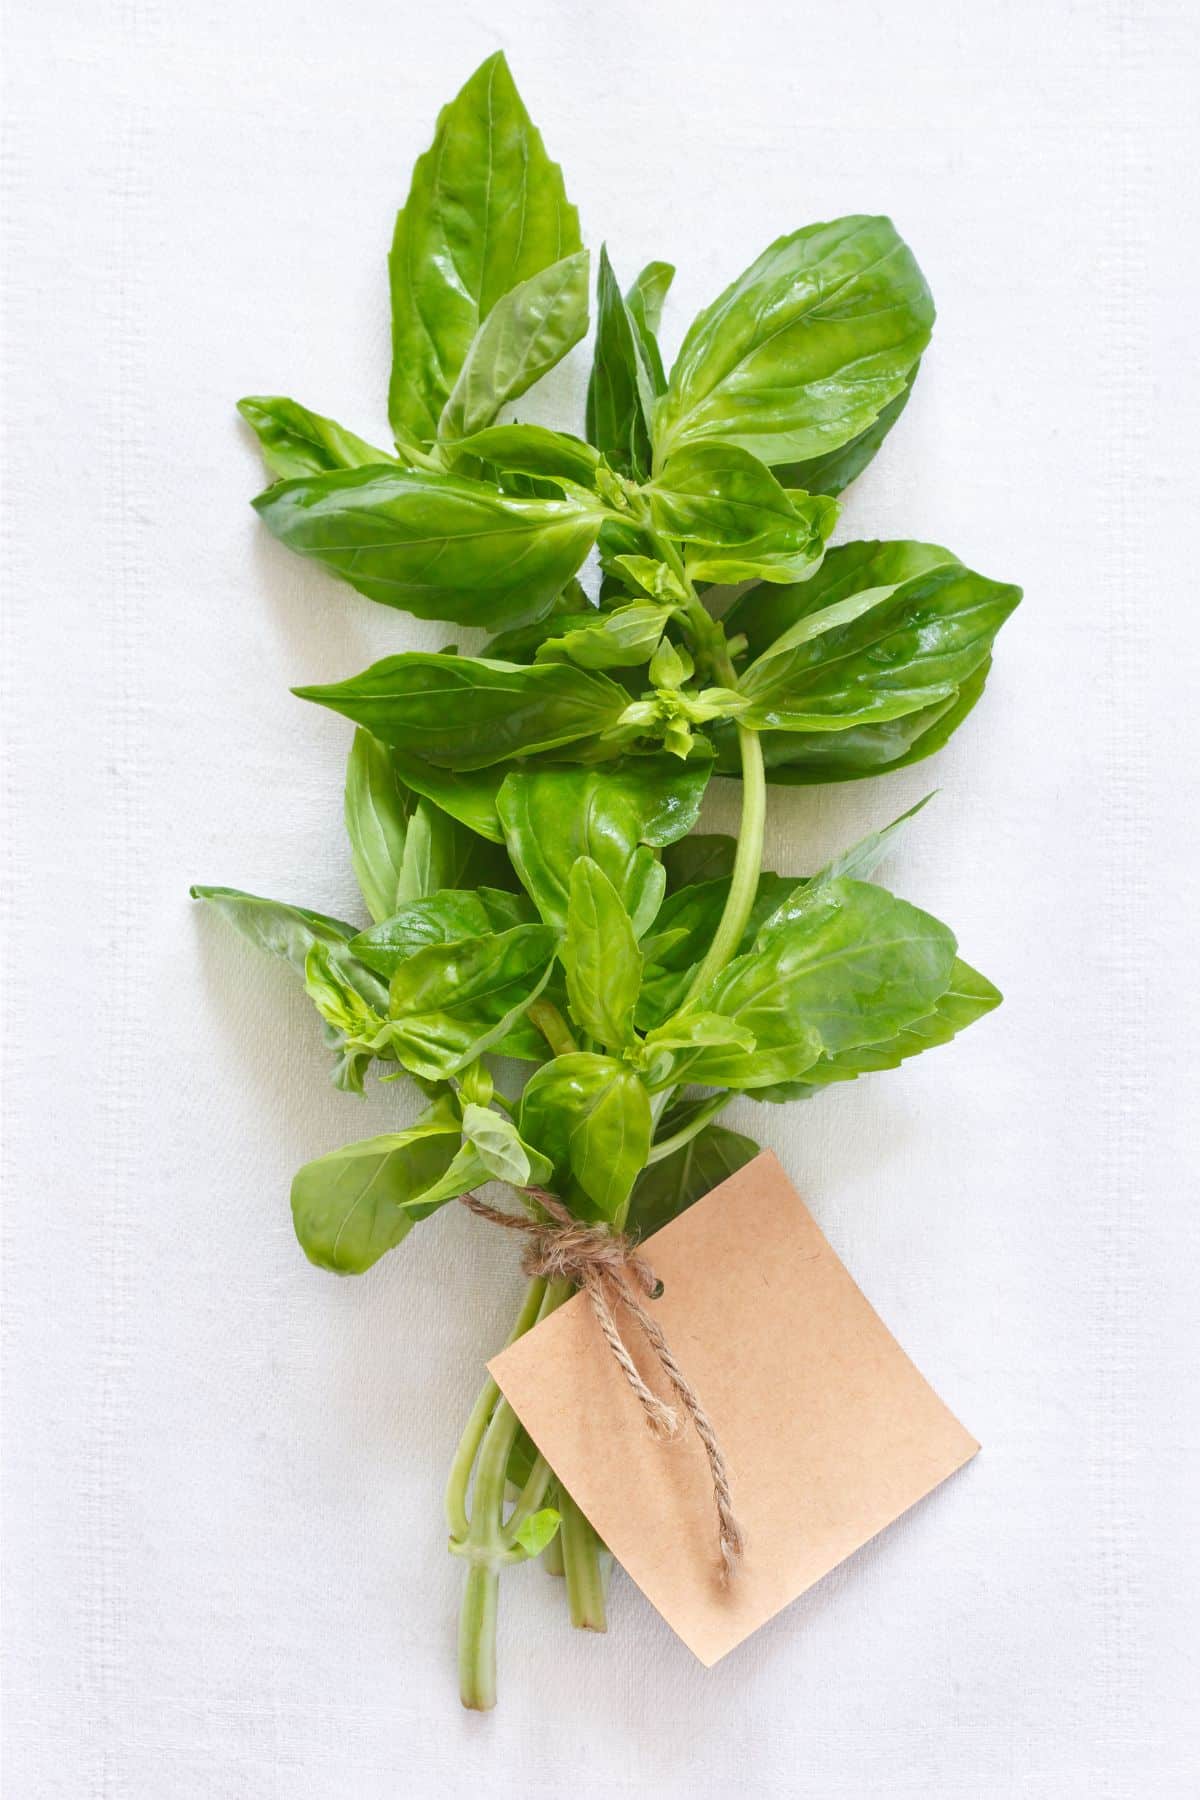 Bunch of fresh basil tied together on white background.